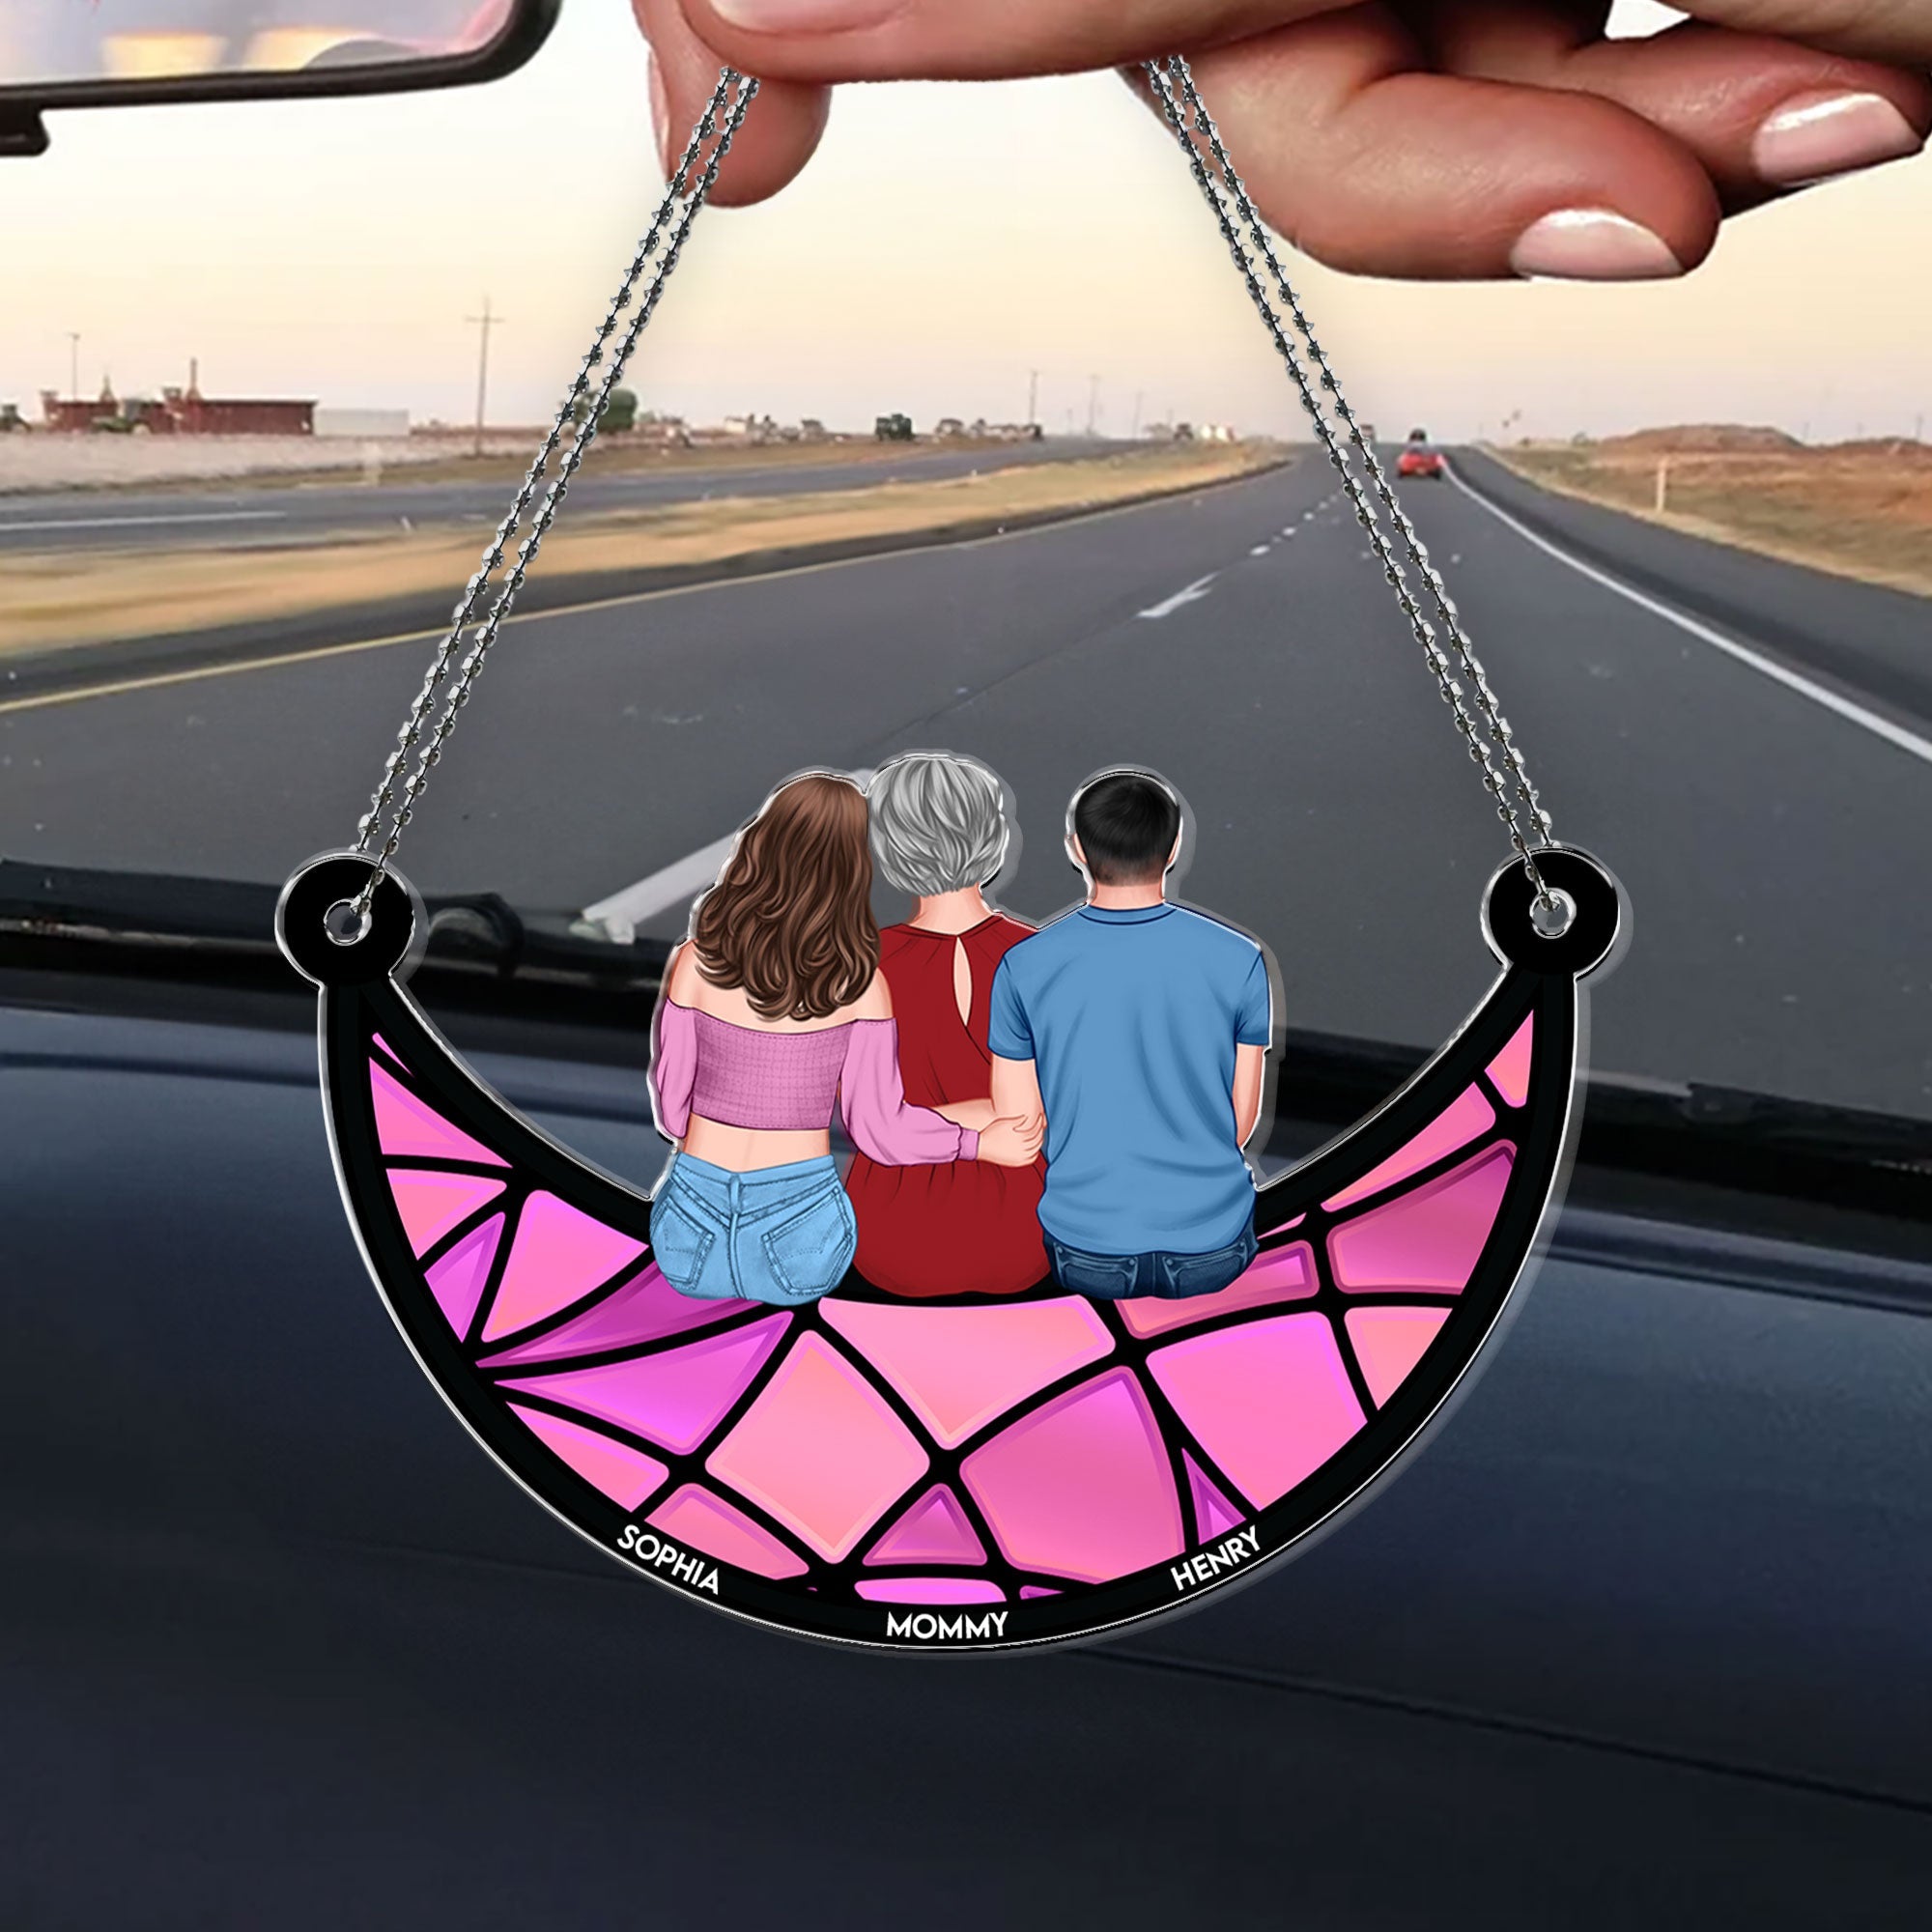 Mommy & Children On The Moon - Personalized Car Ornament